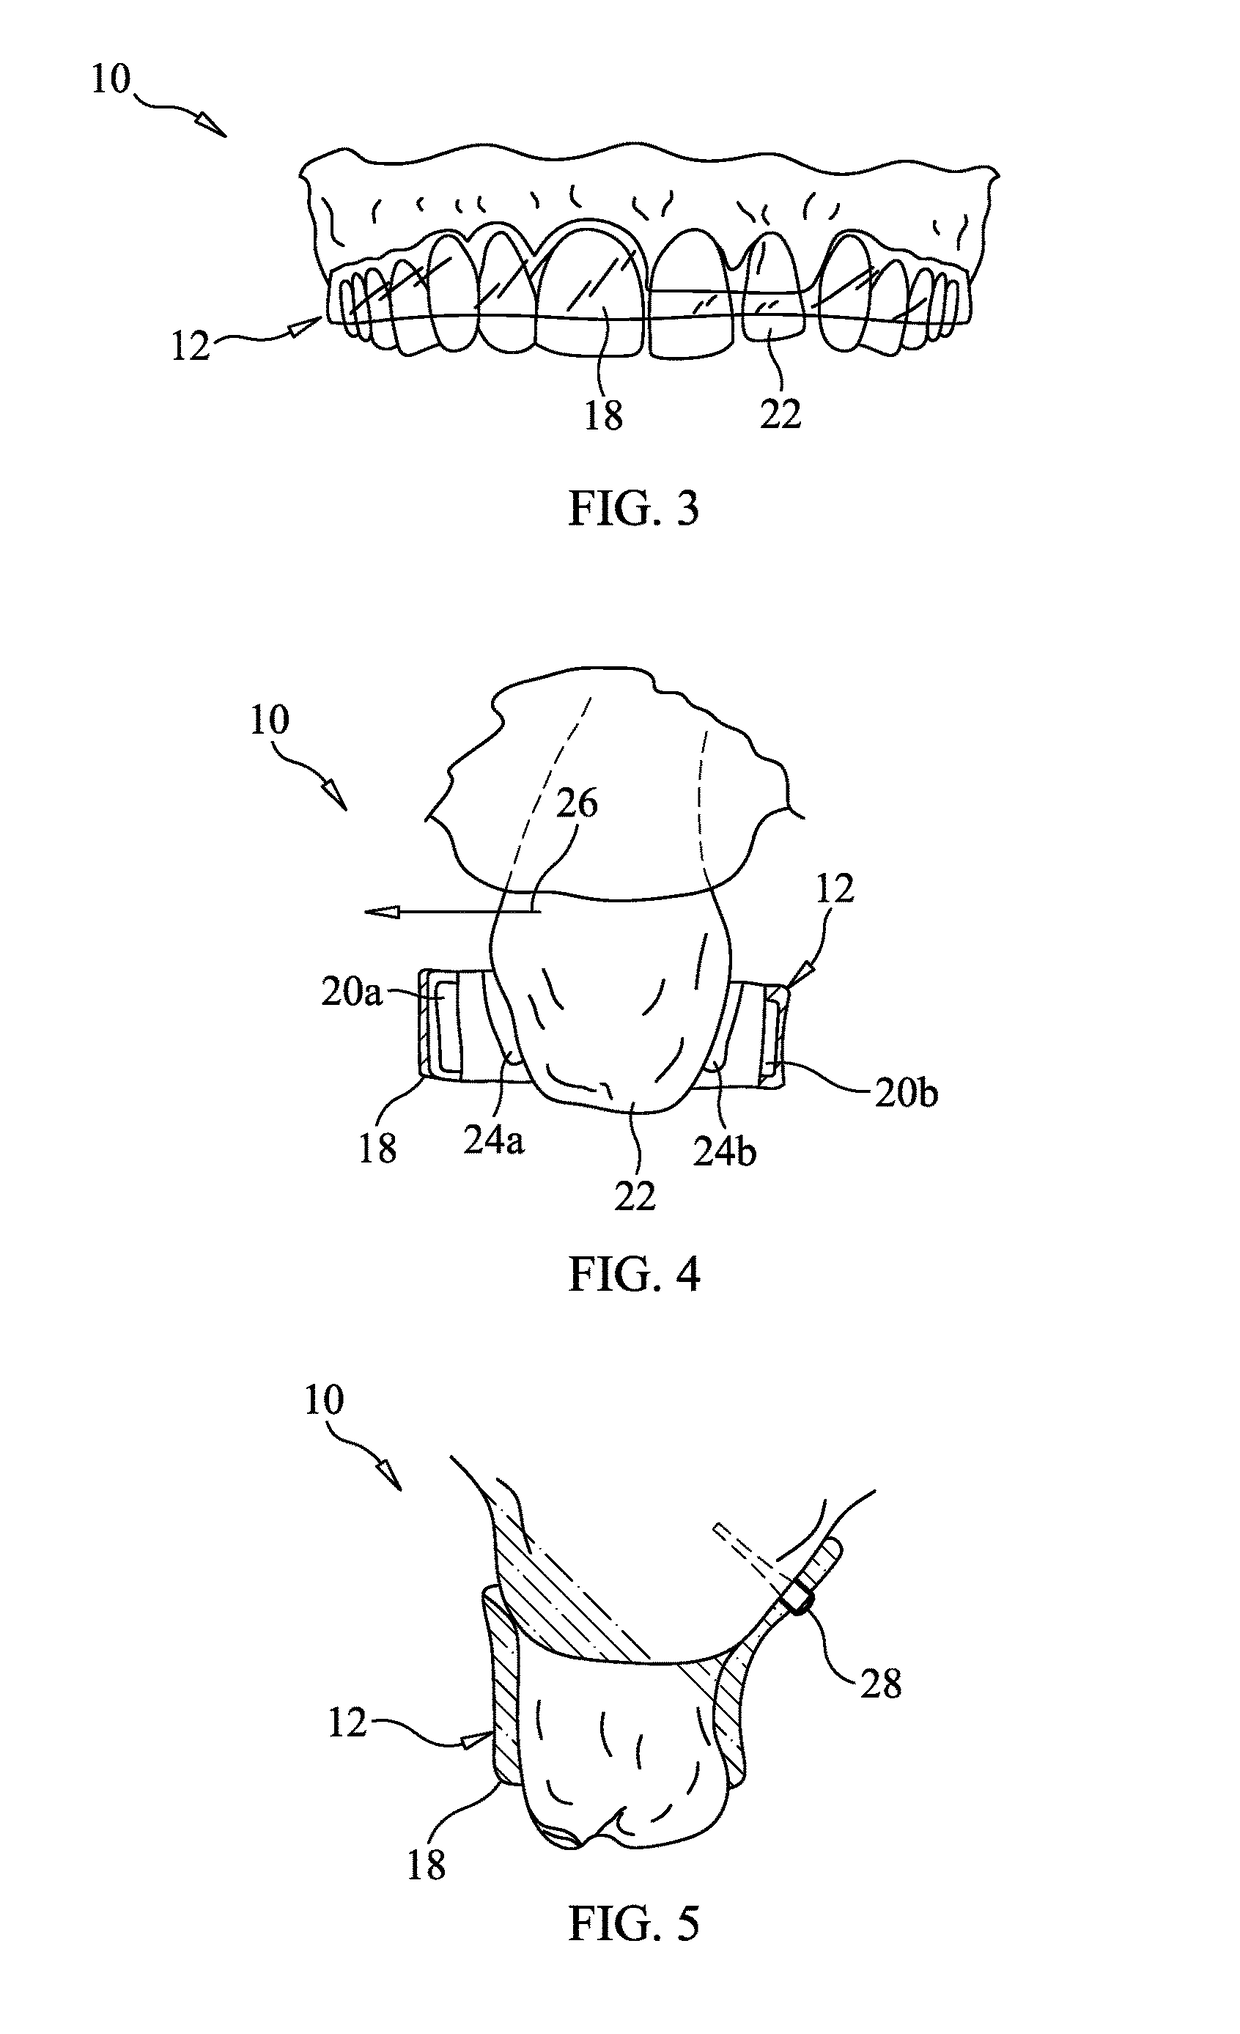 Apparatus and method for correcting orthodontic malocclusions